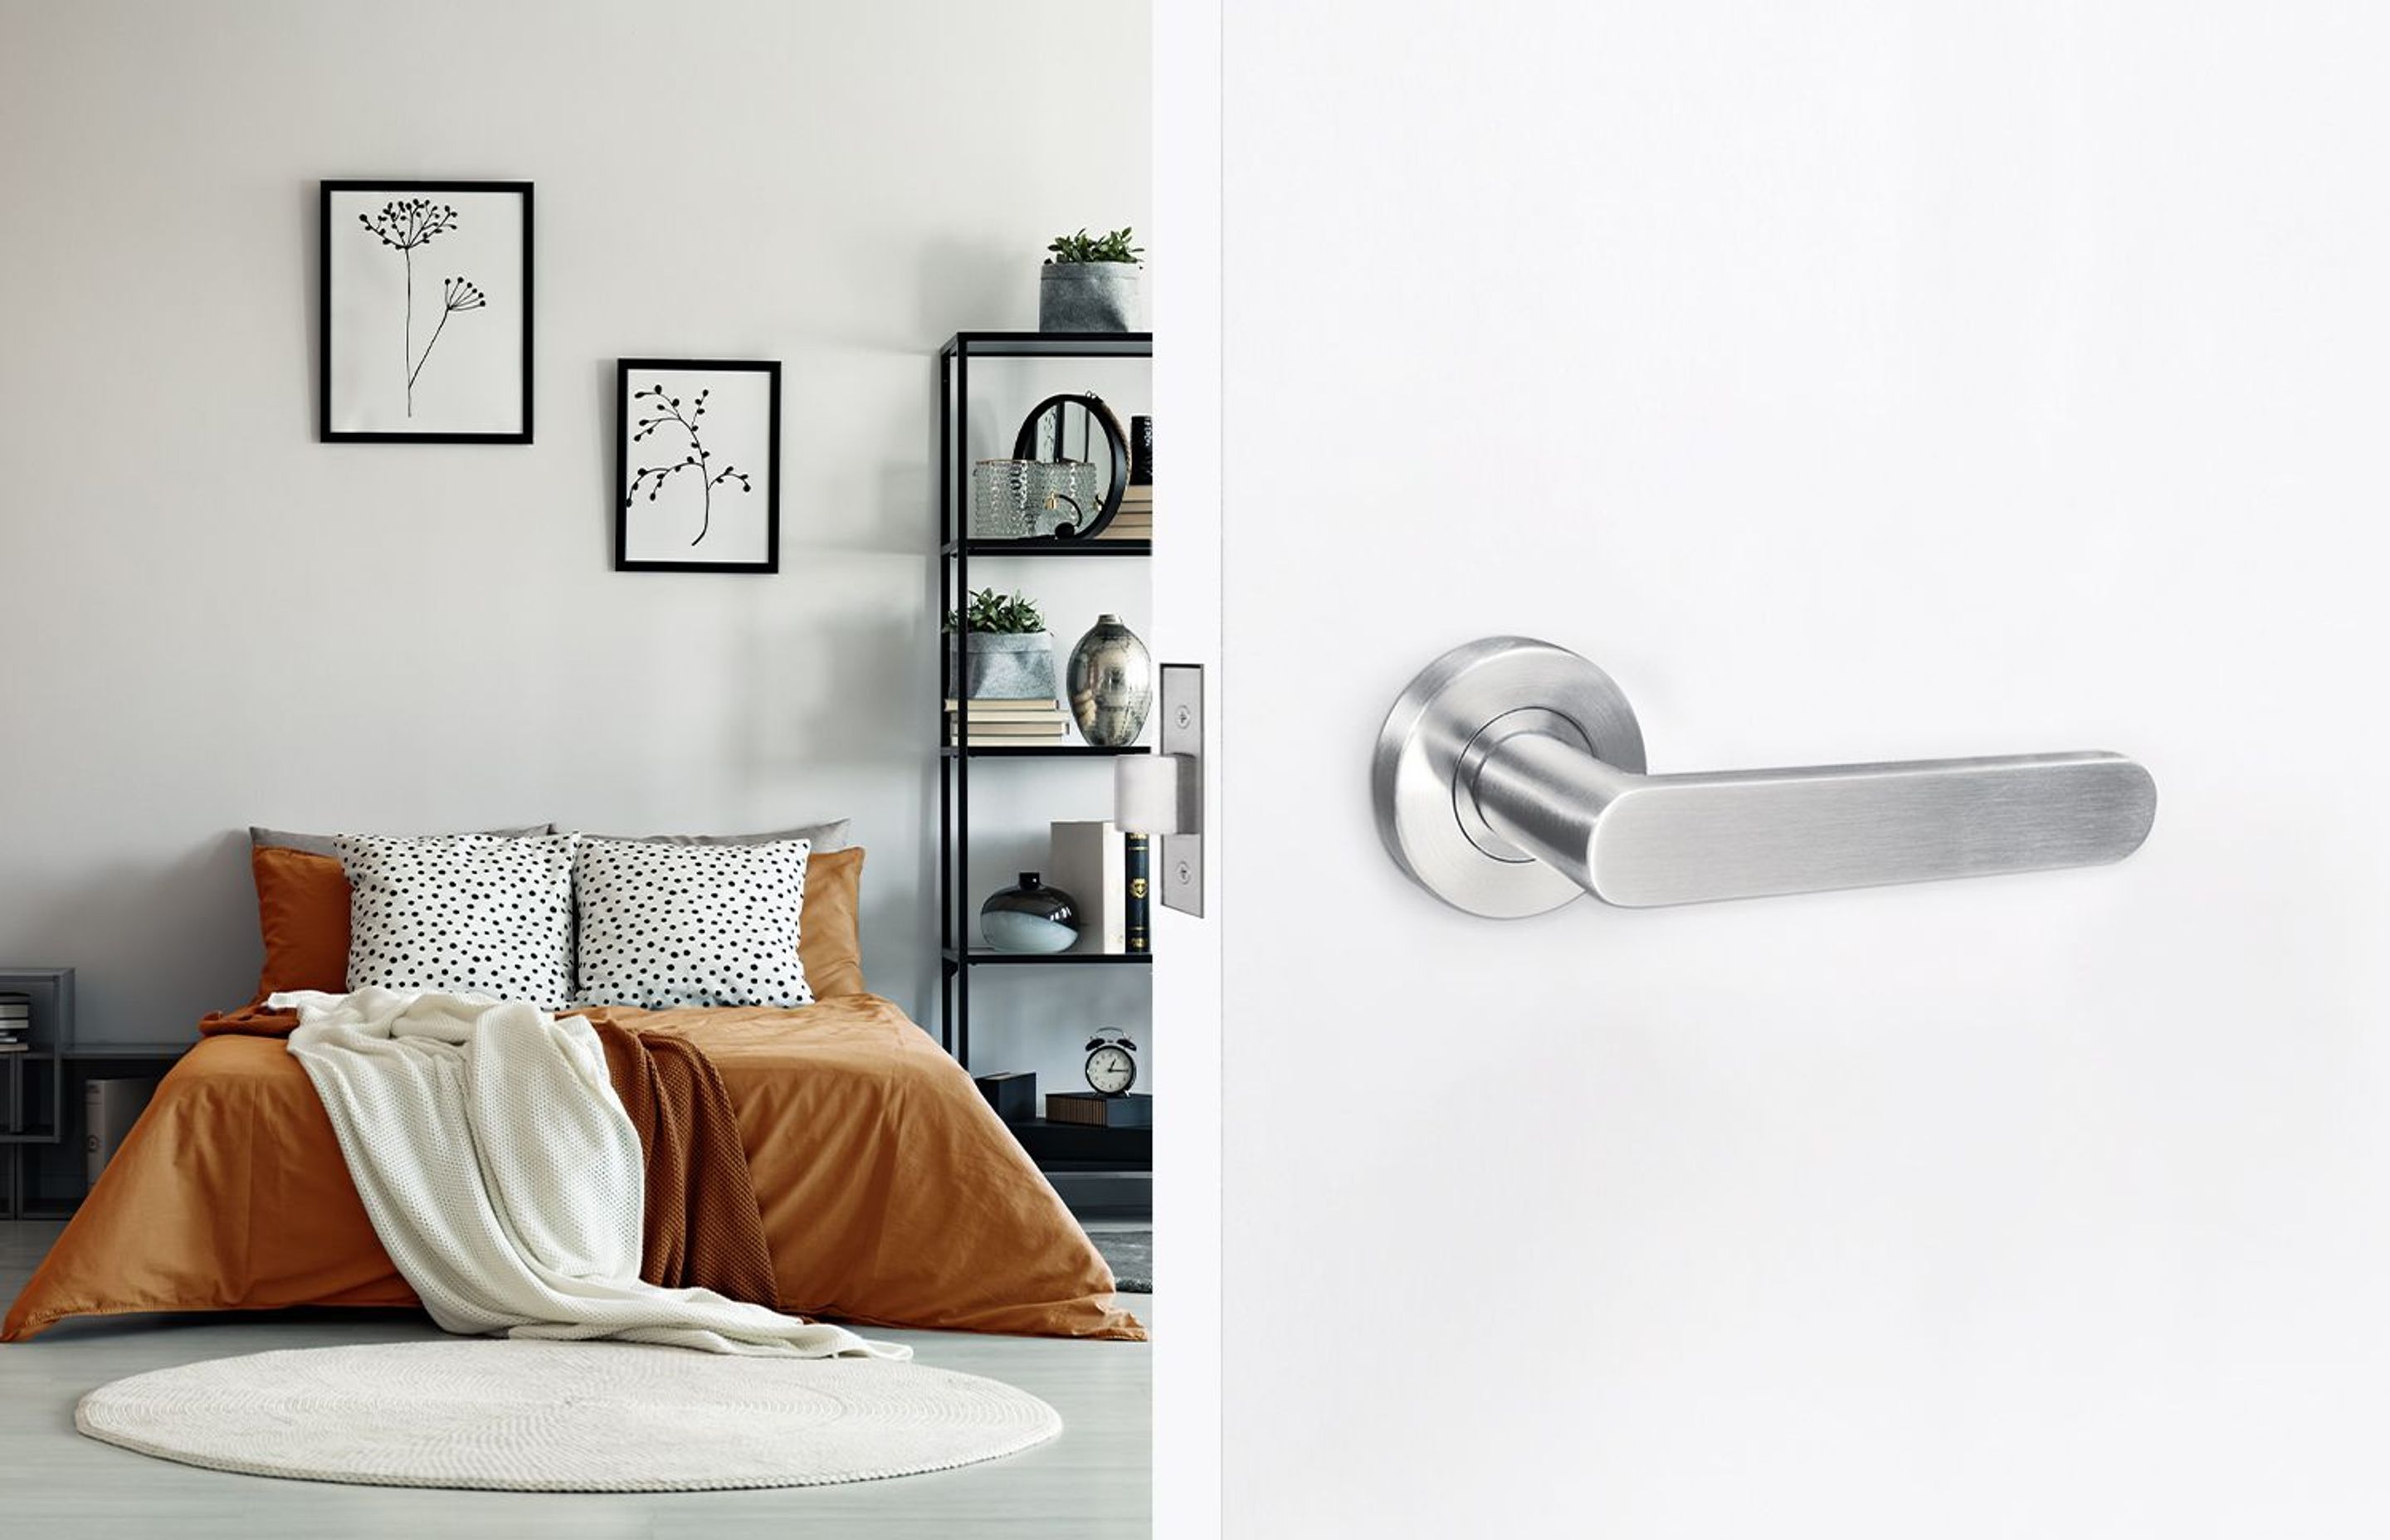 The Yale Simplicity Series consists of an entry kitset with fire-compliant lock, closer, handles and escutcheons, as well as passage lever sets for standard internal doors and privacy lever sets for bathrooms.